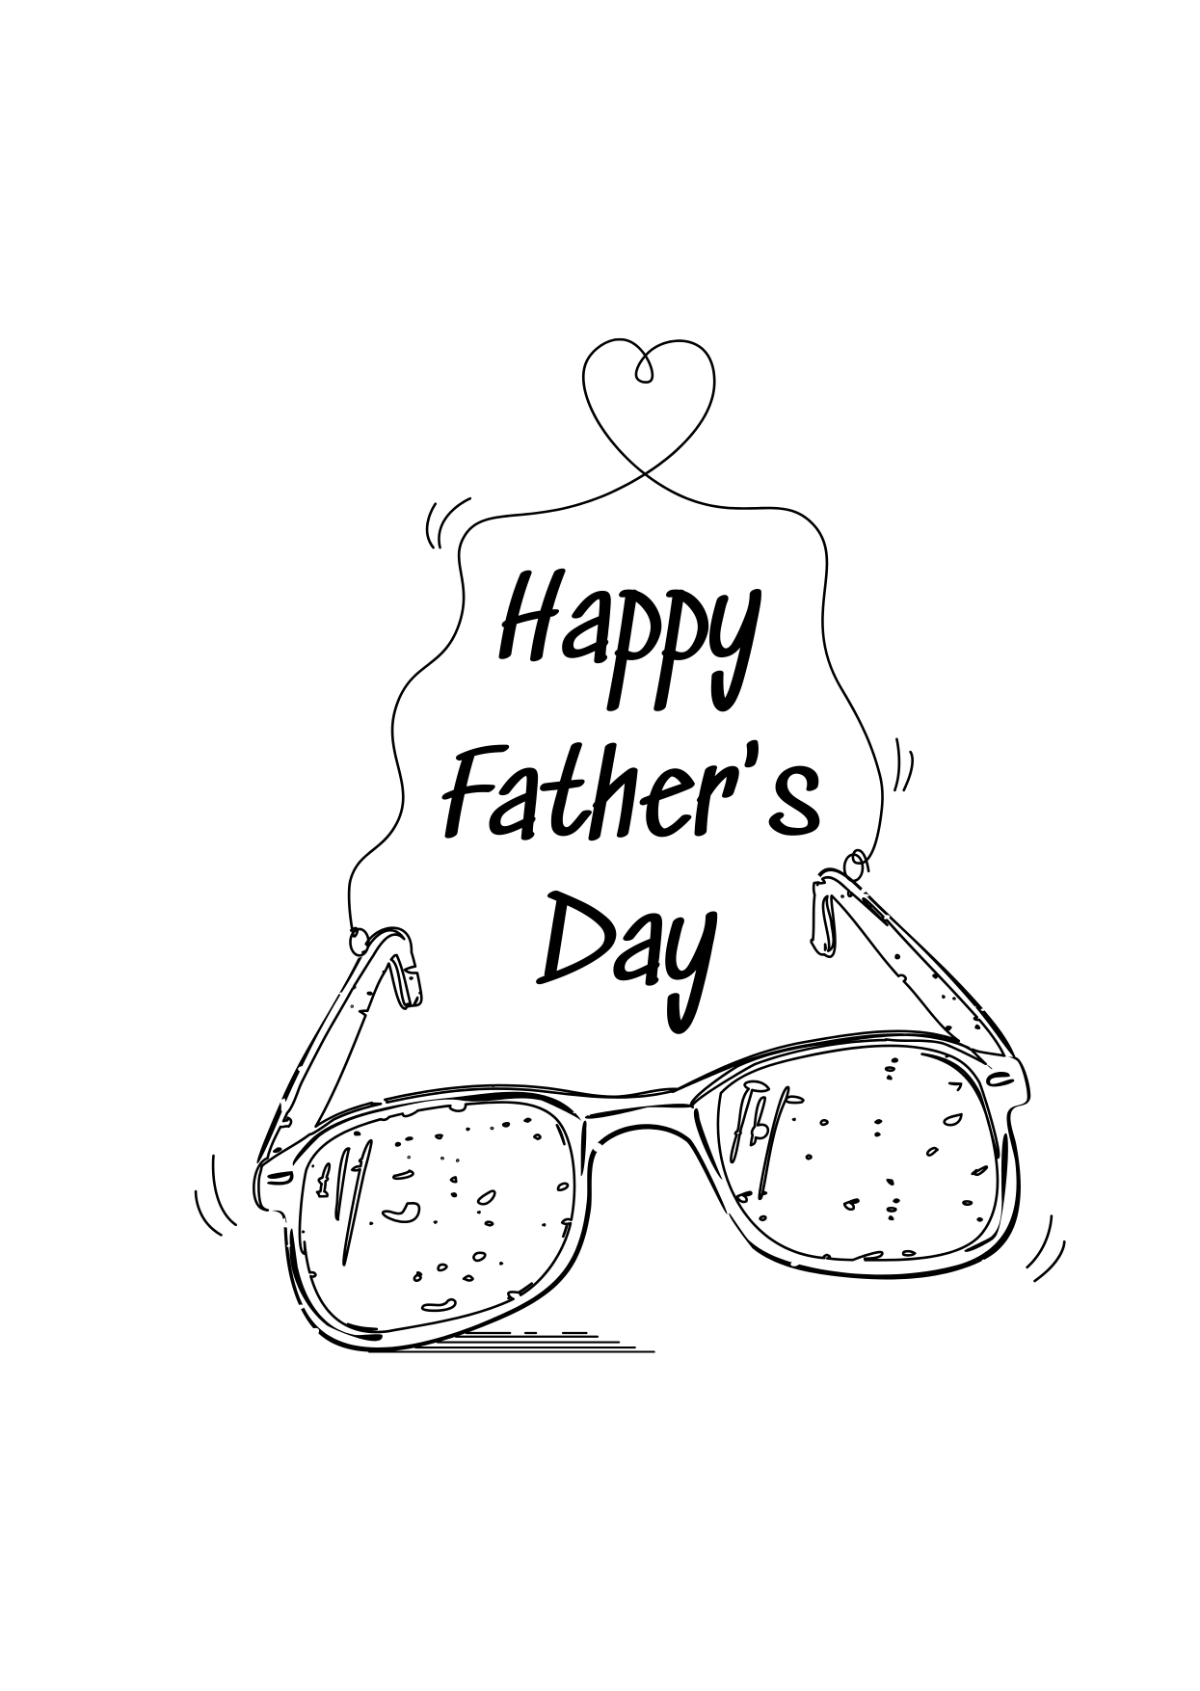 Happy Father's Day Drawing